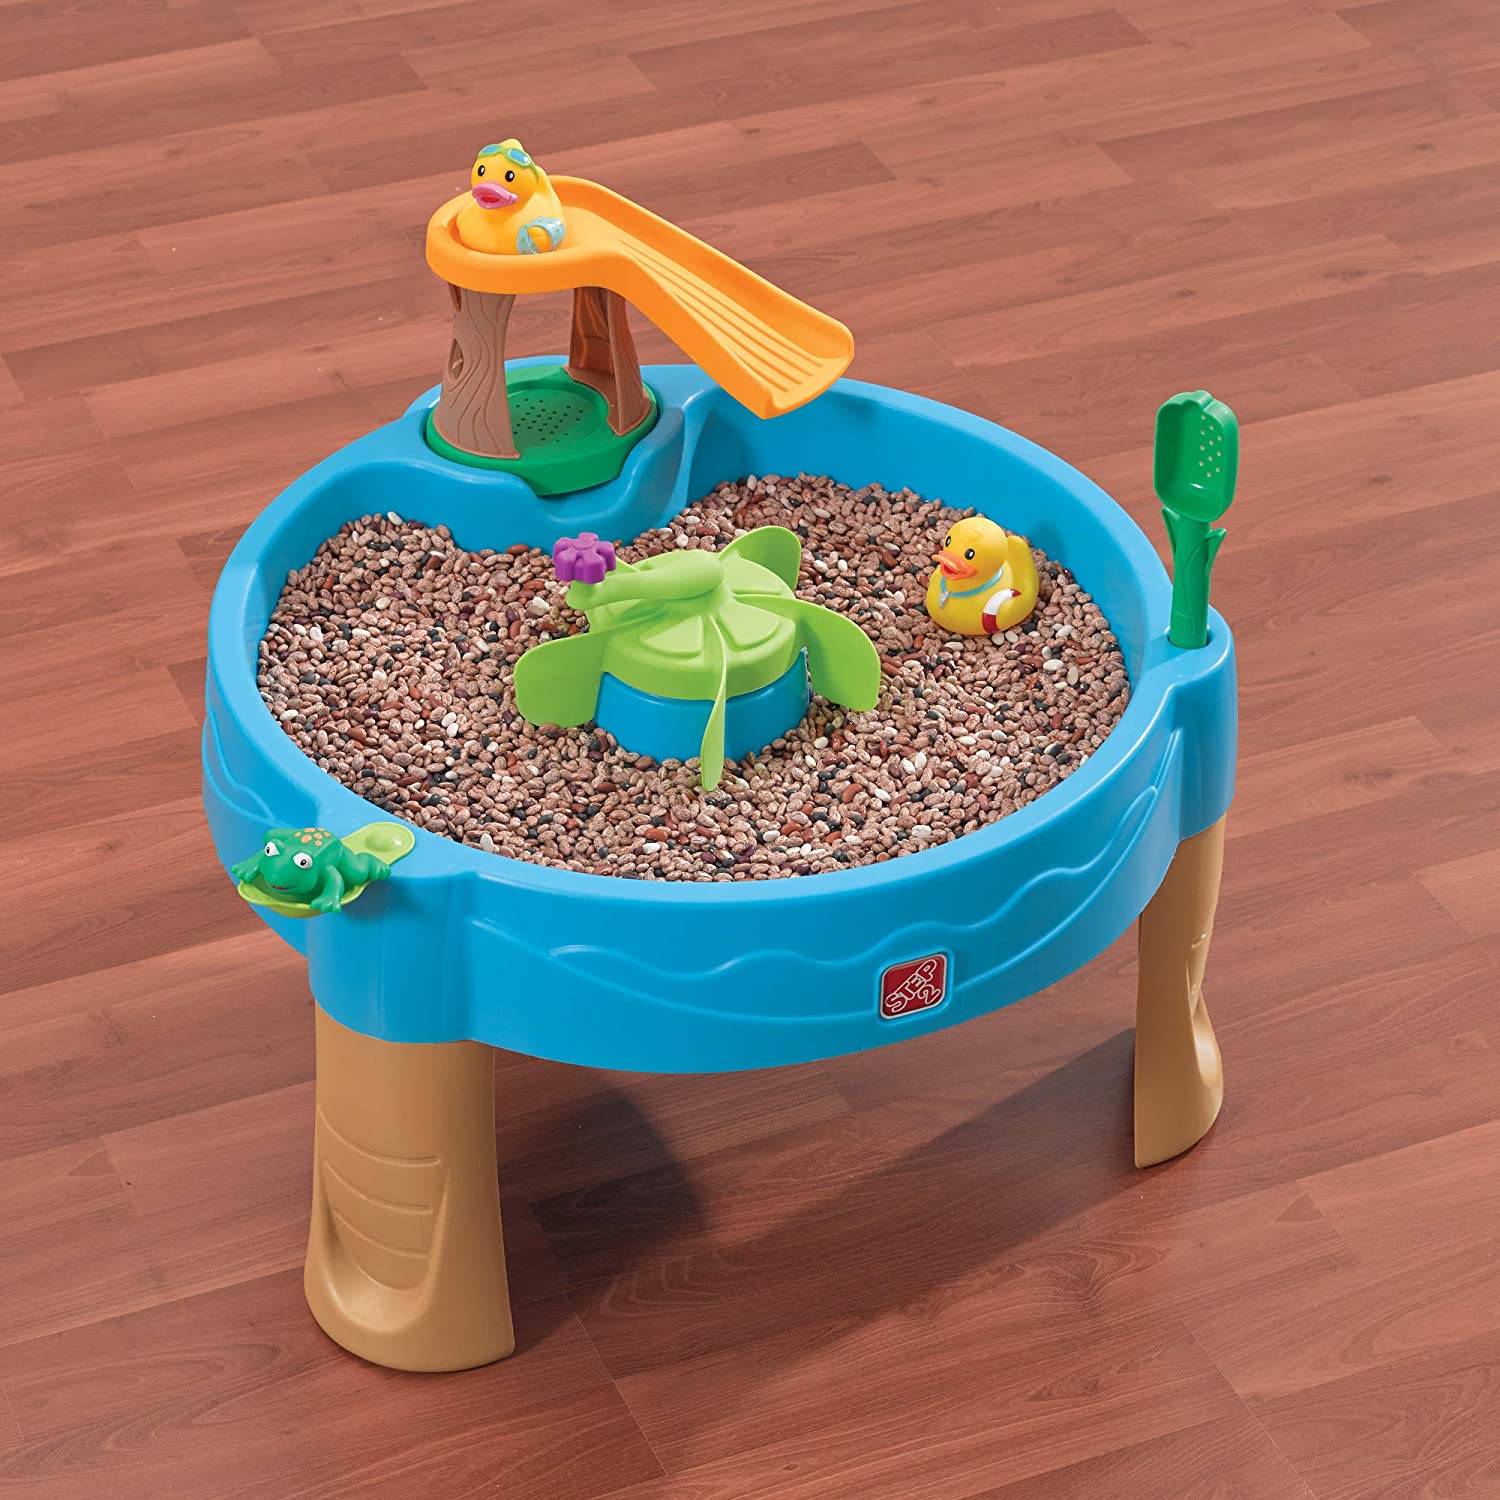 Step 2 Duck Pond Water Table Sand & Water Play Toy for Kids